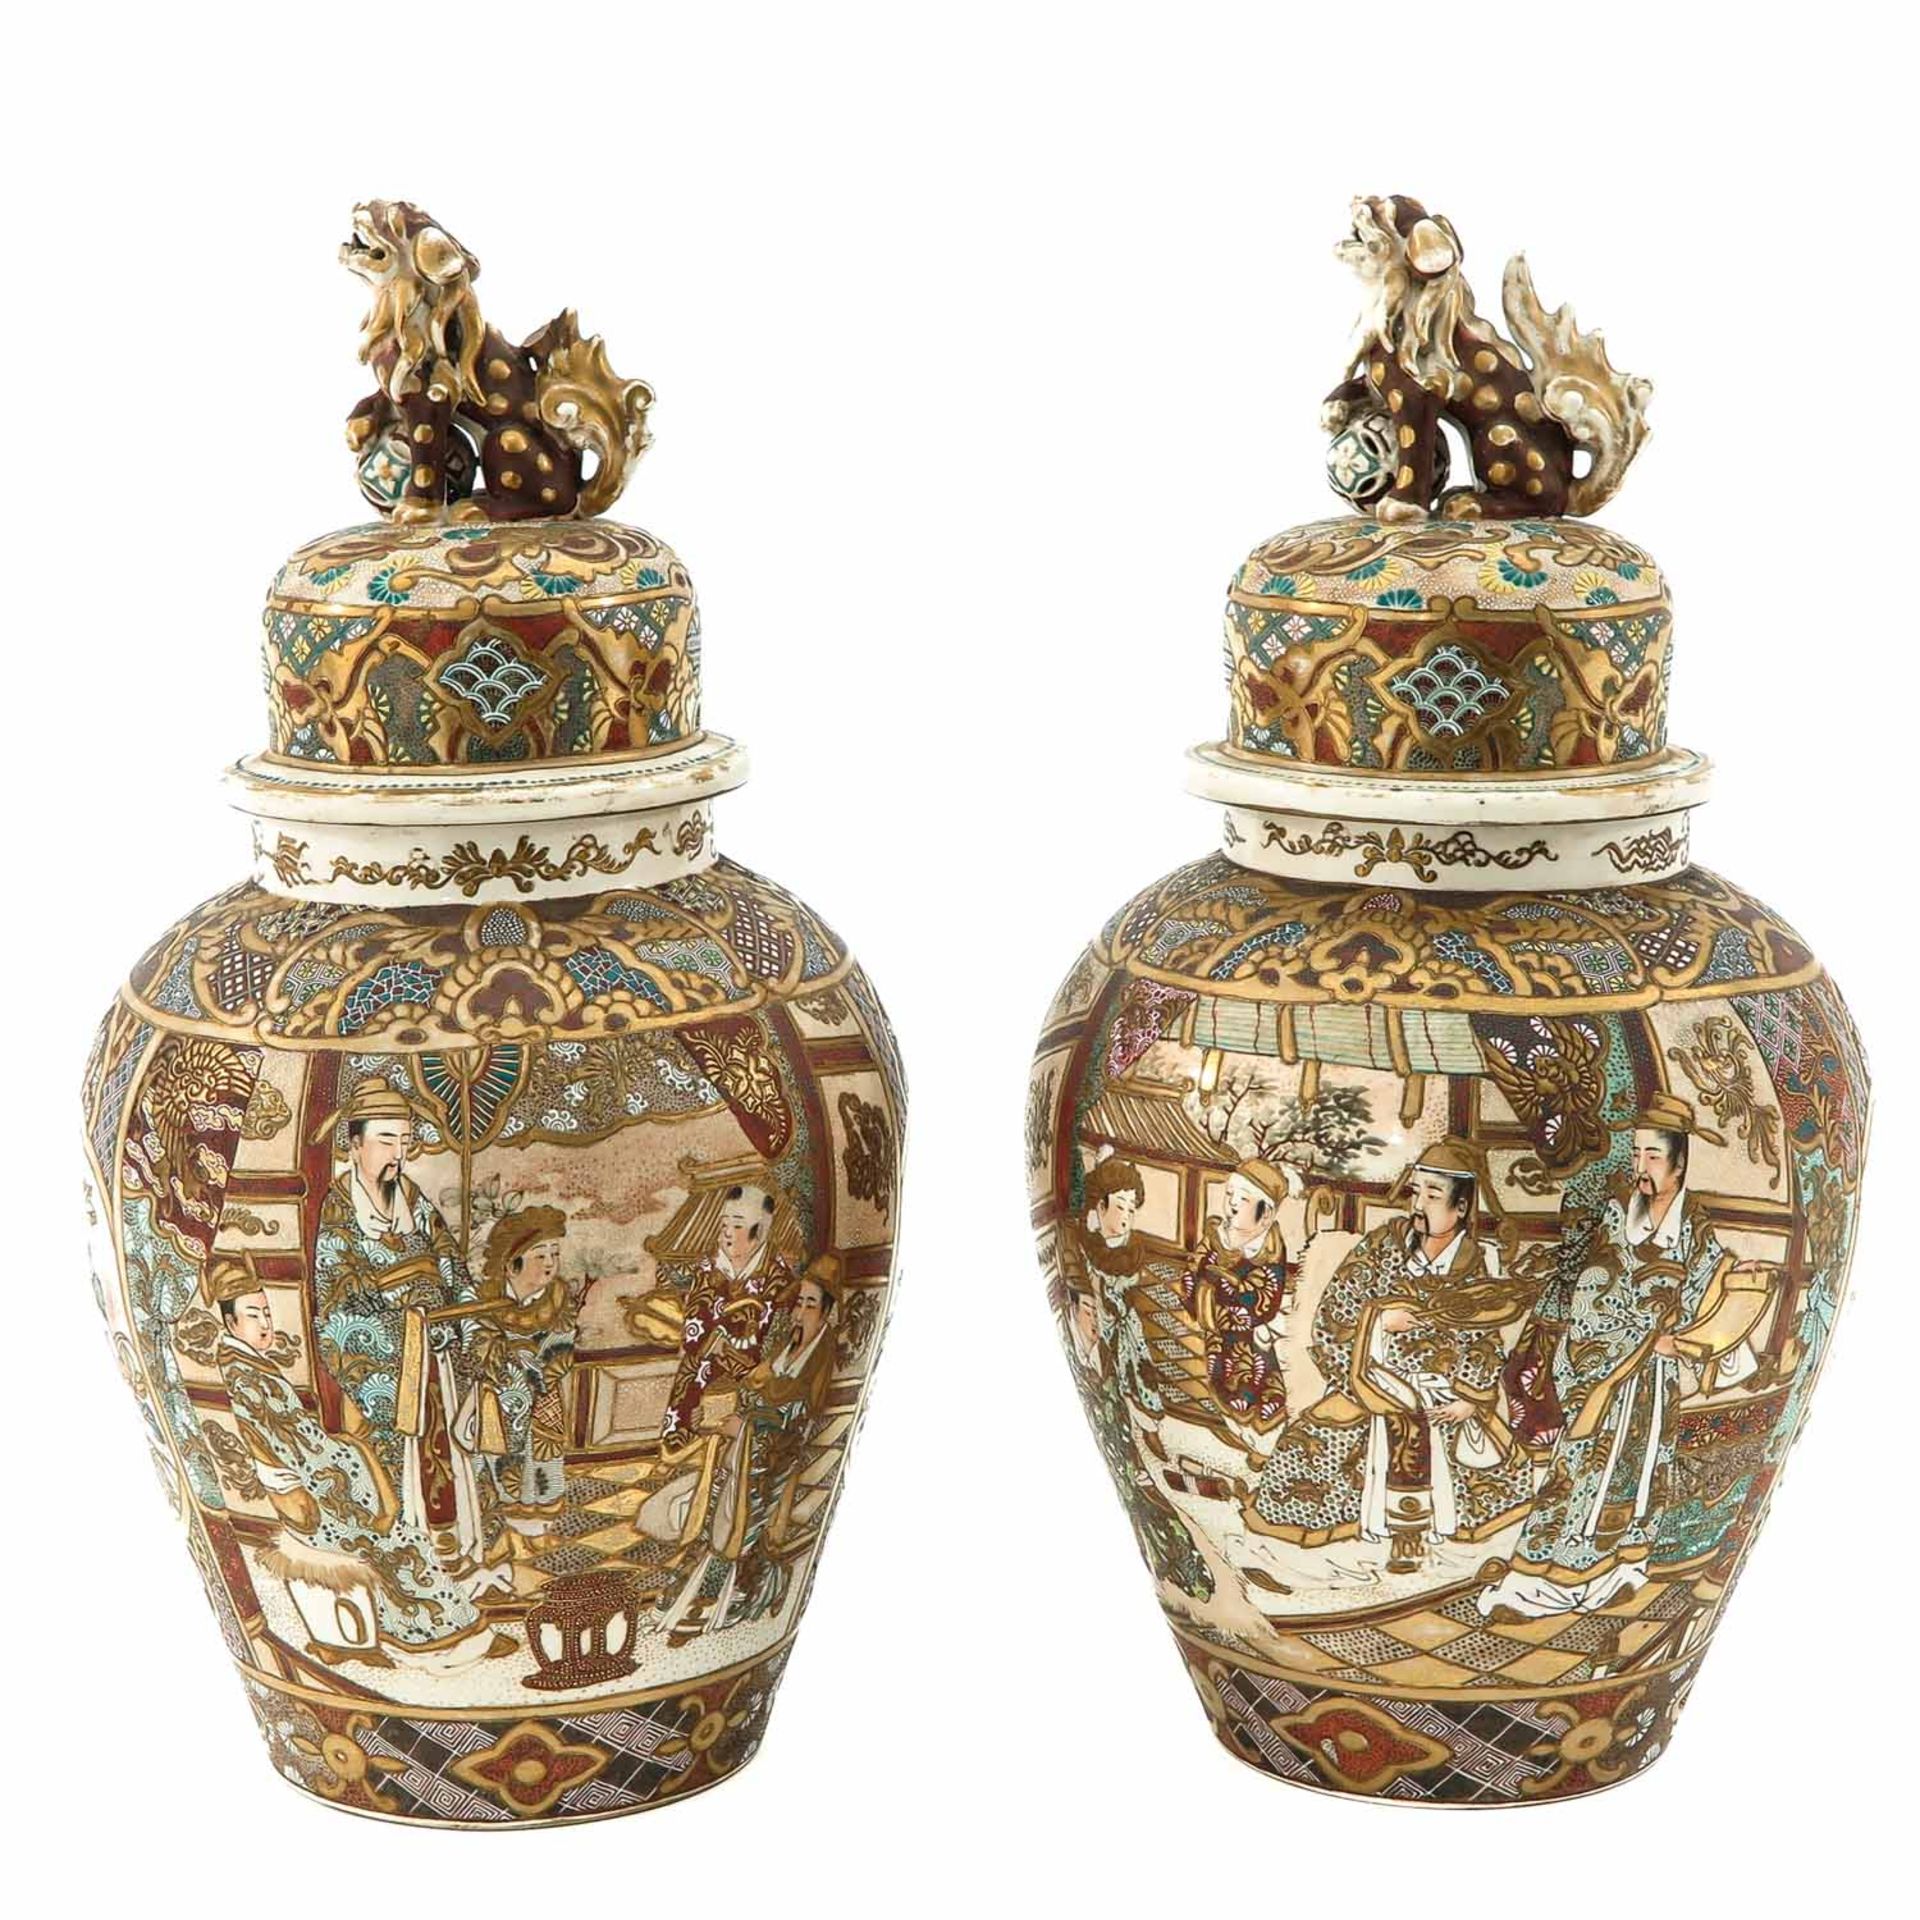 A Pair of Satsuma Vases with Covers